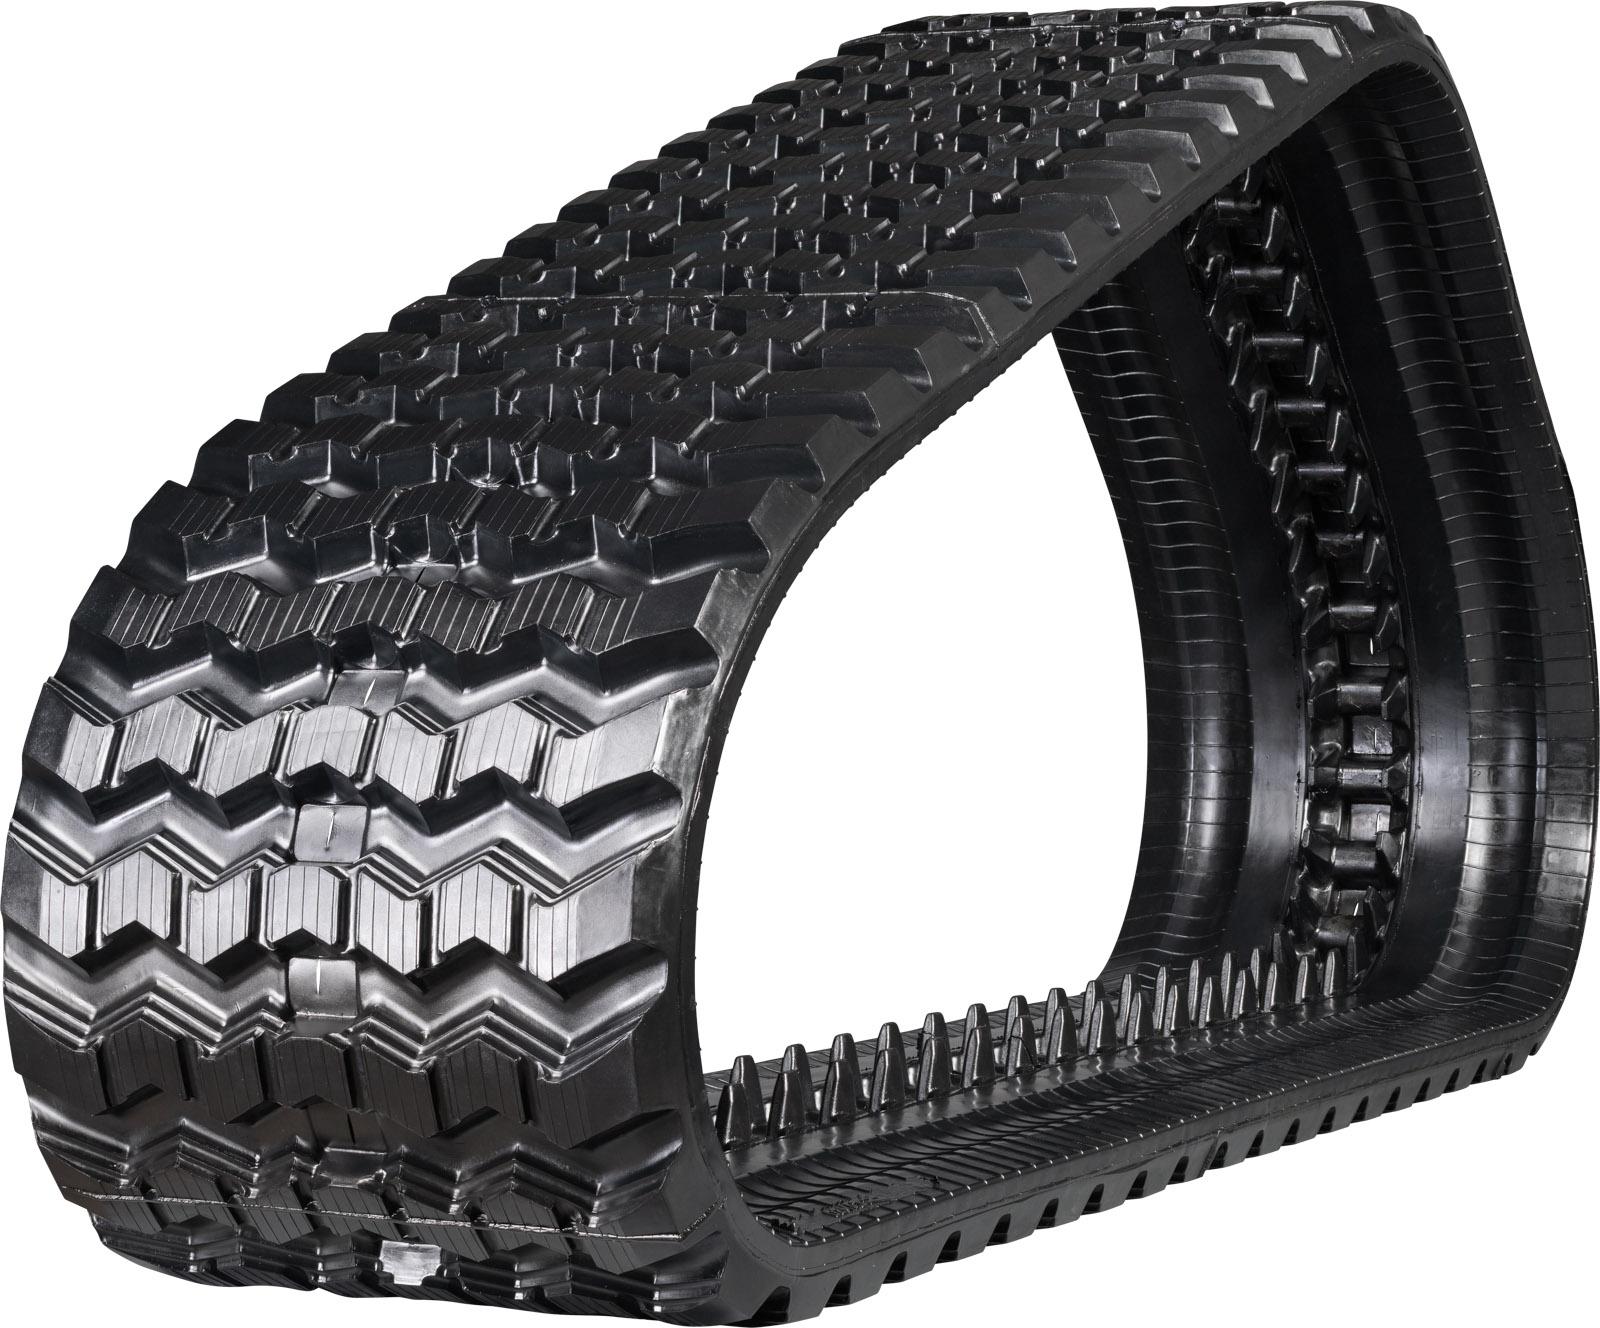 set of 2 16" camso heavy duty sawtooth pattern rubber track (400x86bx52)